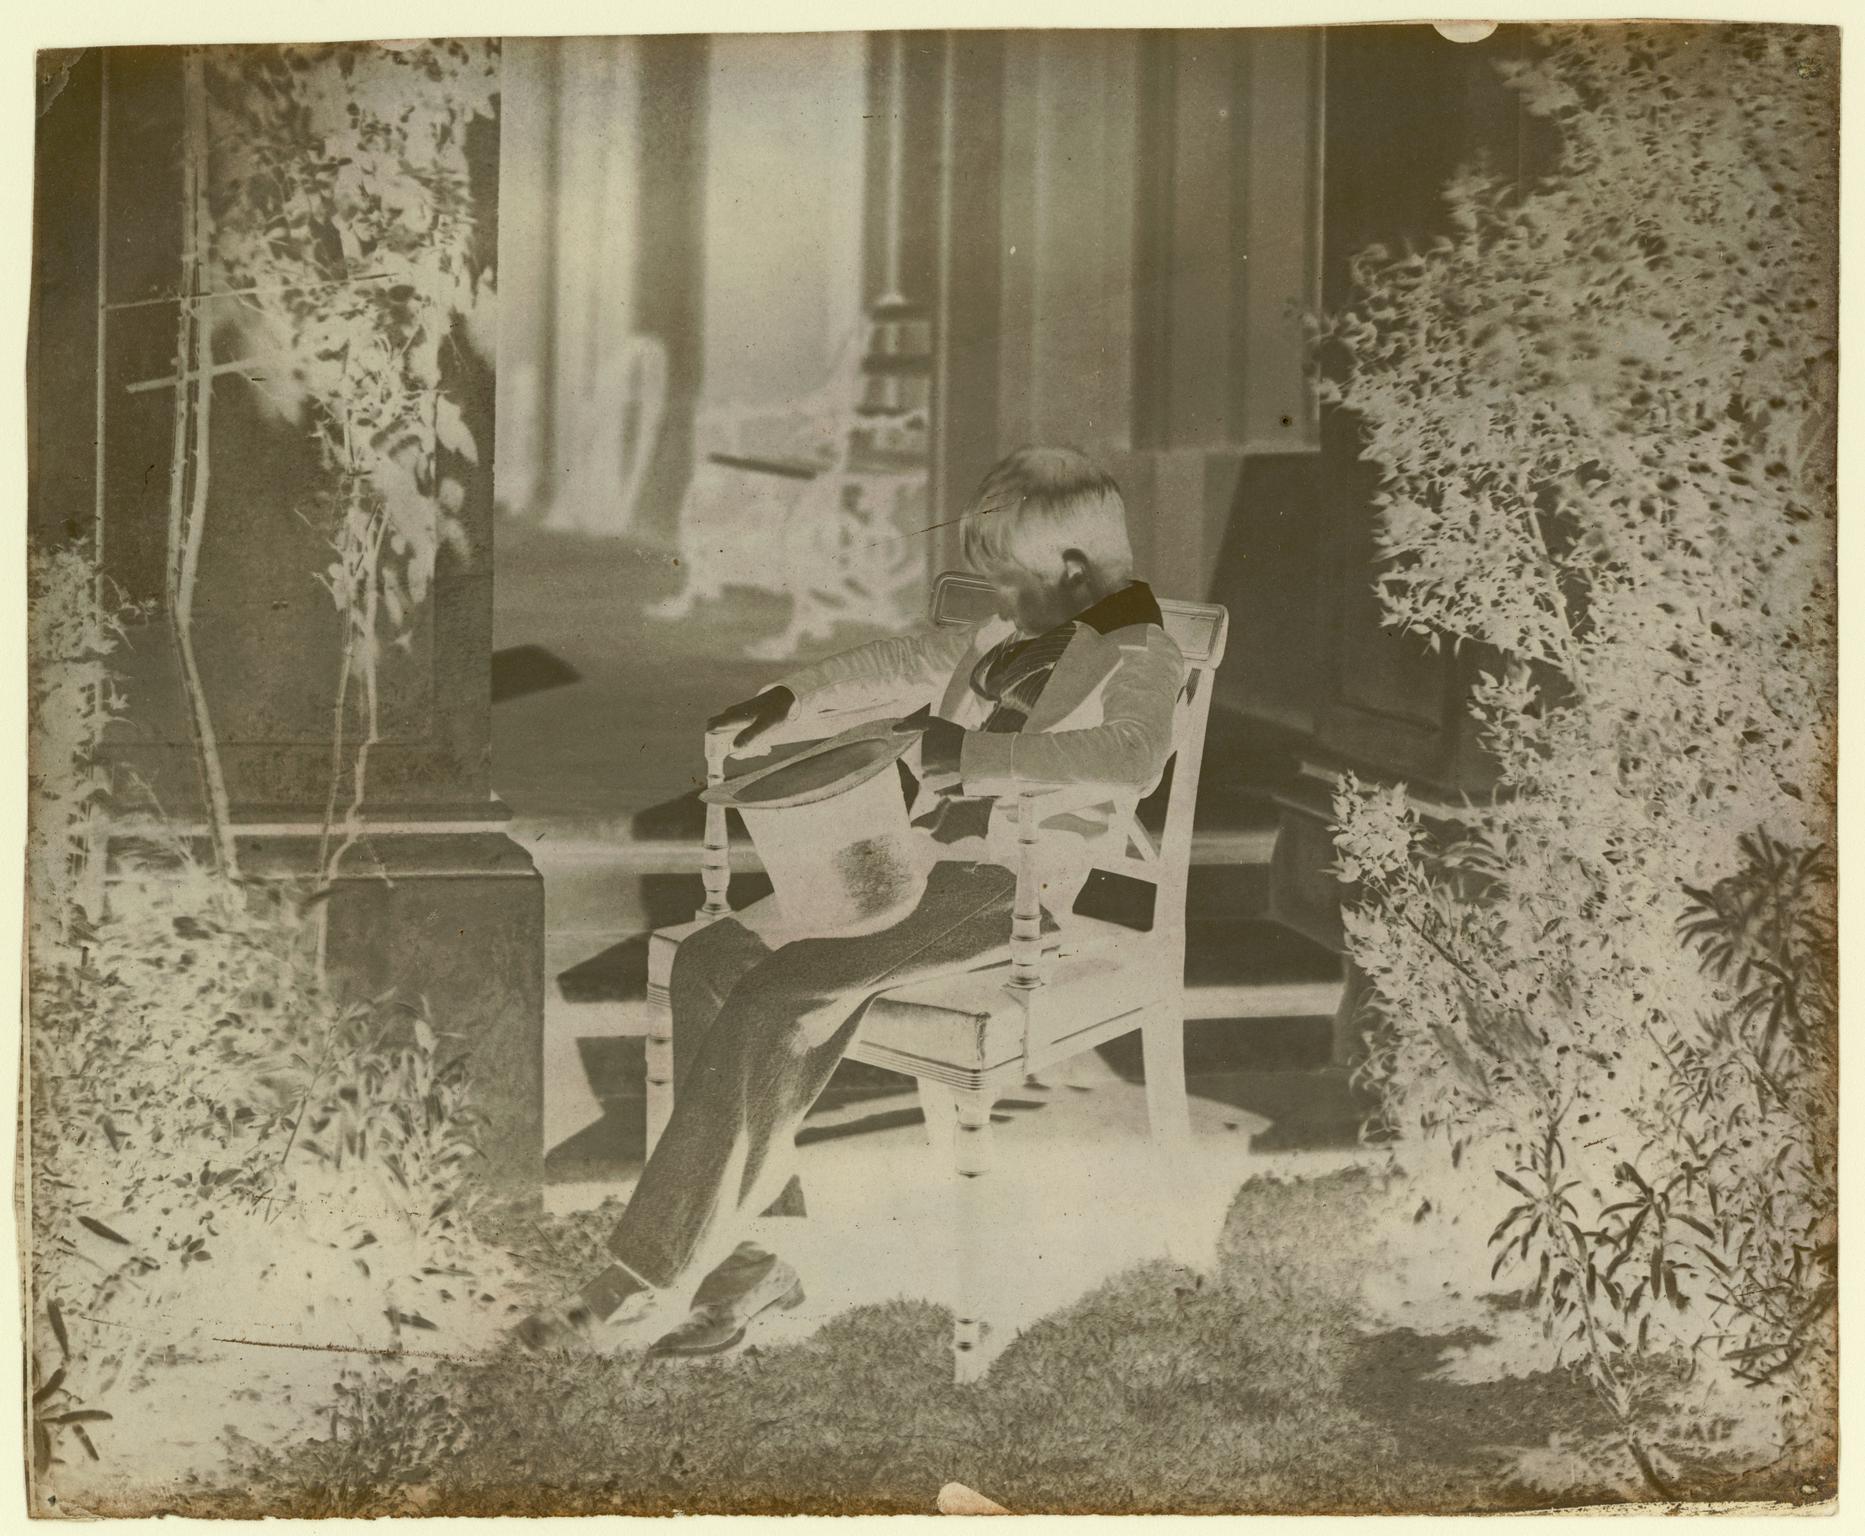 Willy Llewelyn, negative